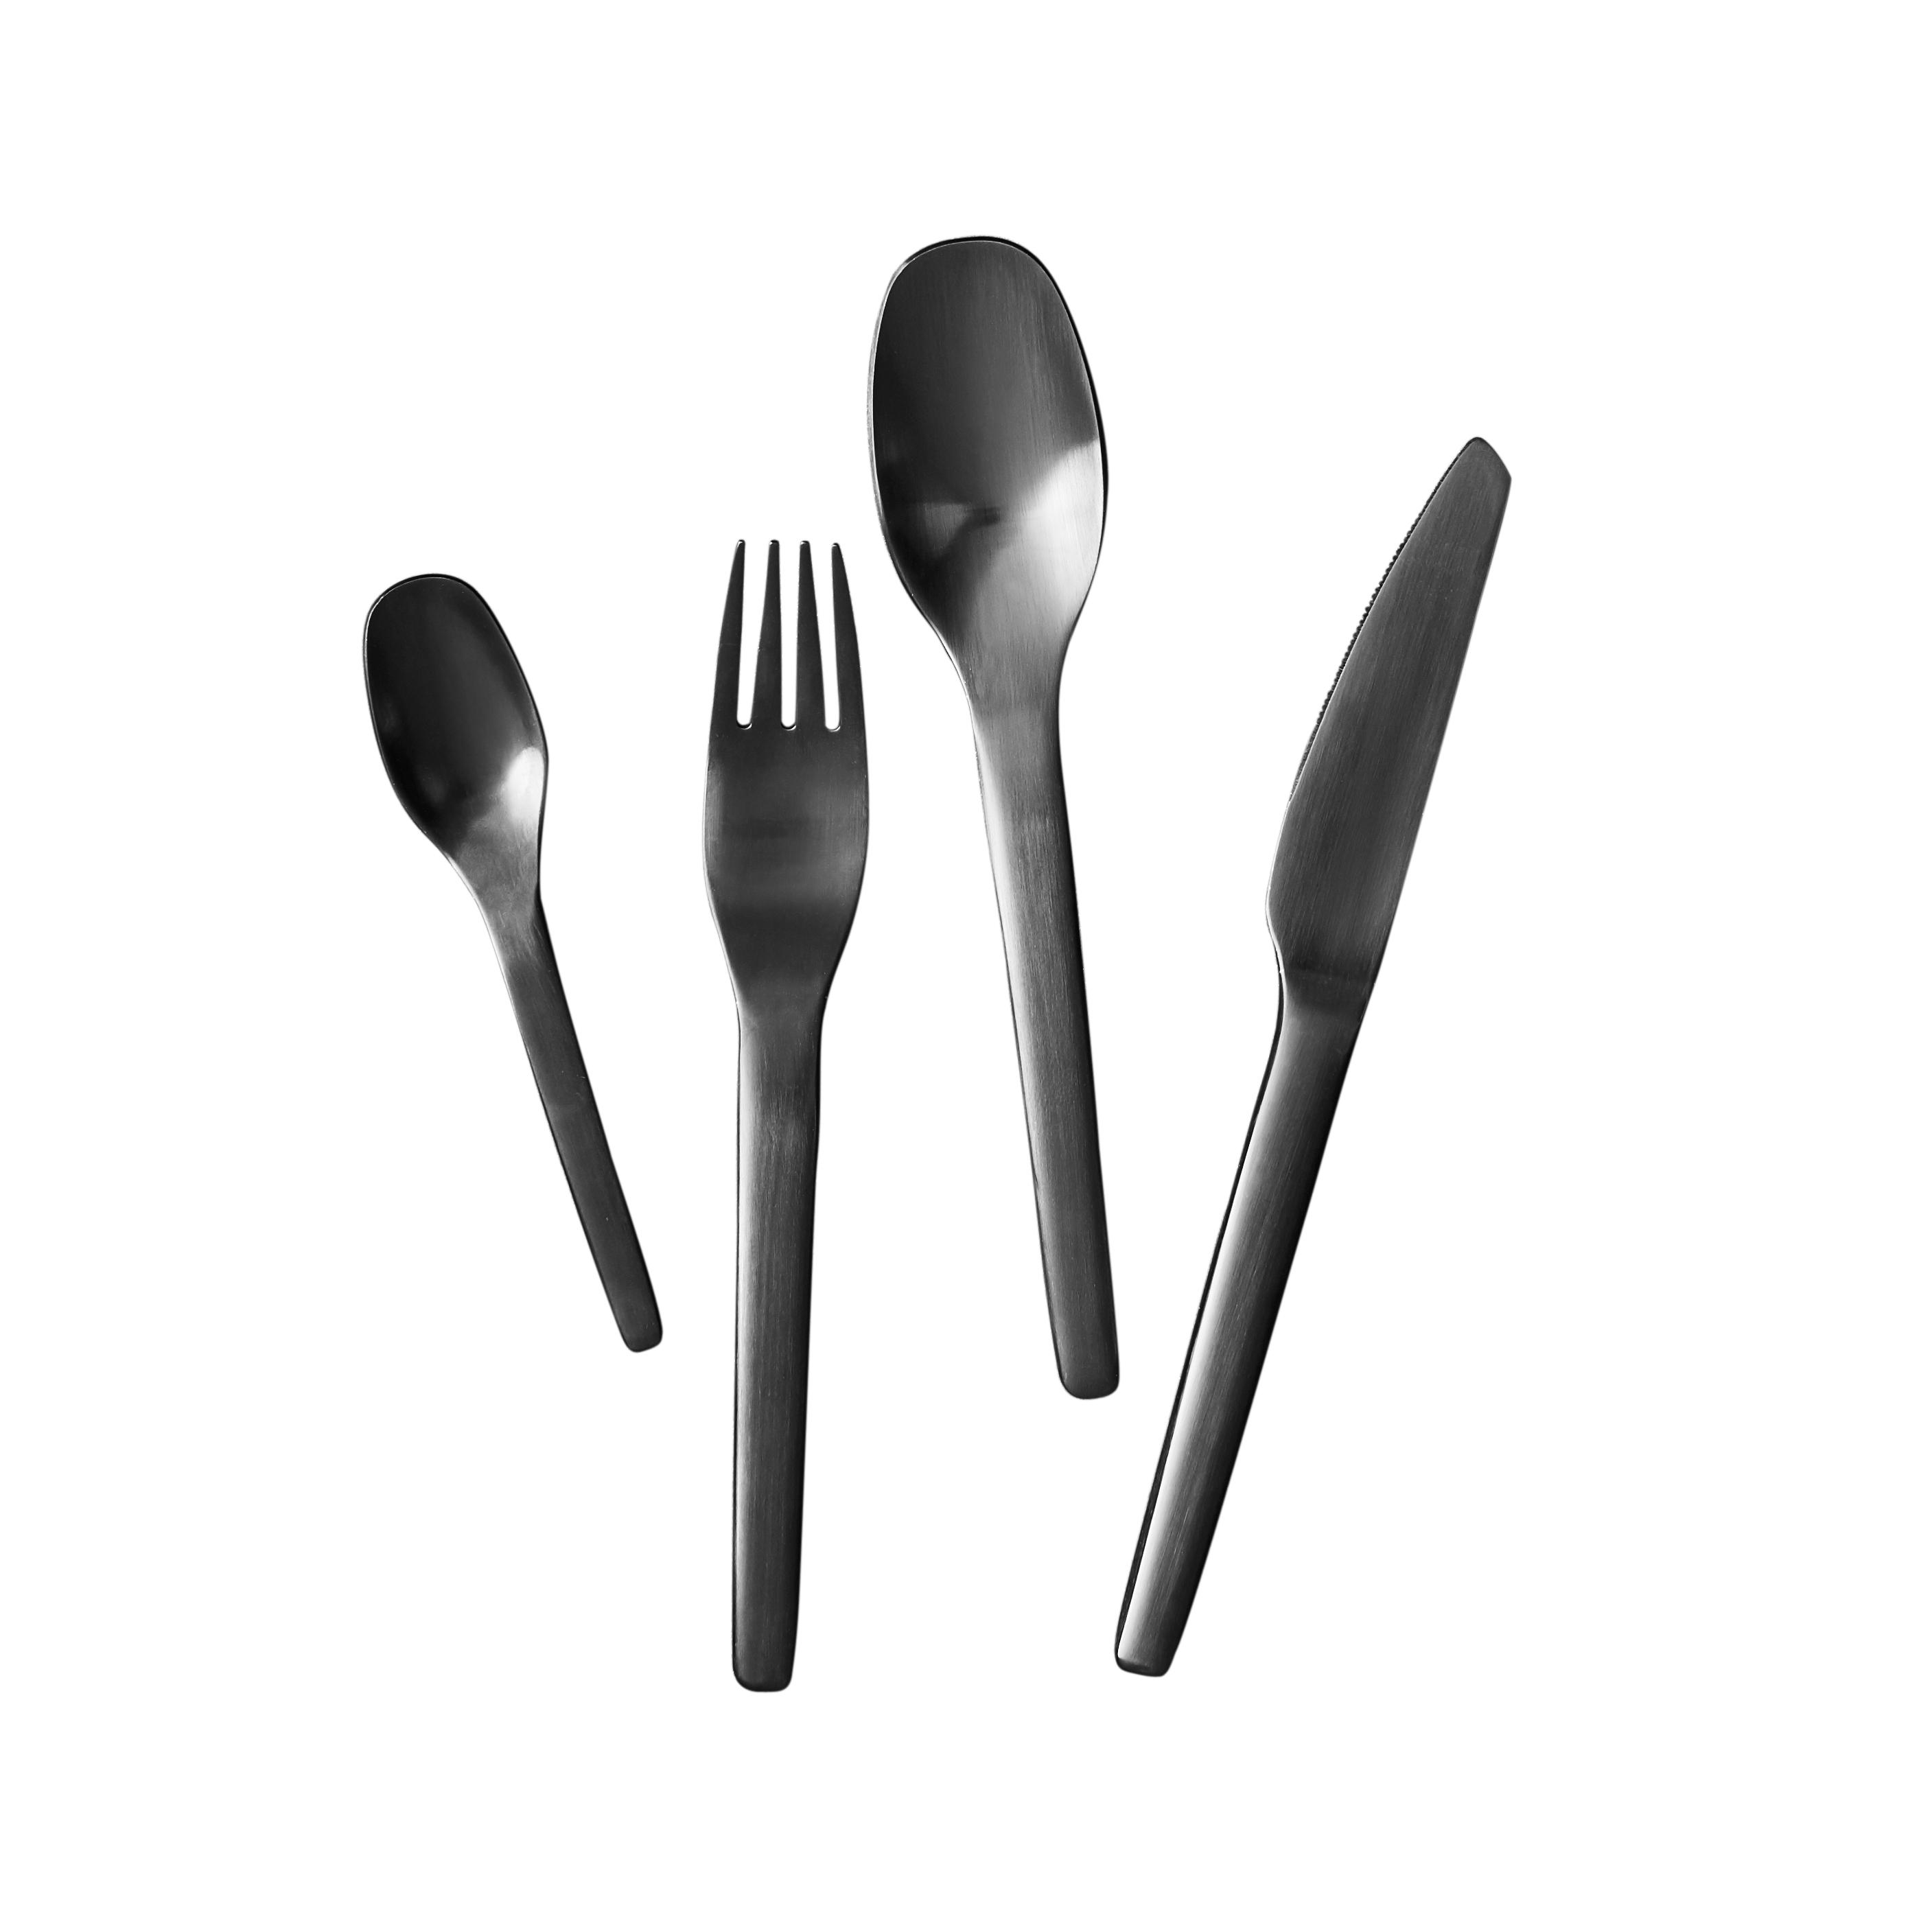 Ensō cutlery series in stainless steel and black PVD for AIDA.